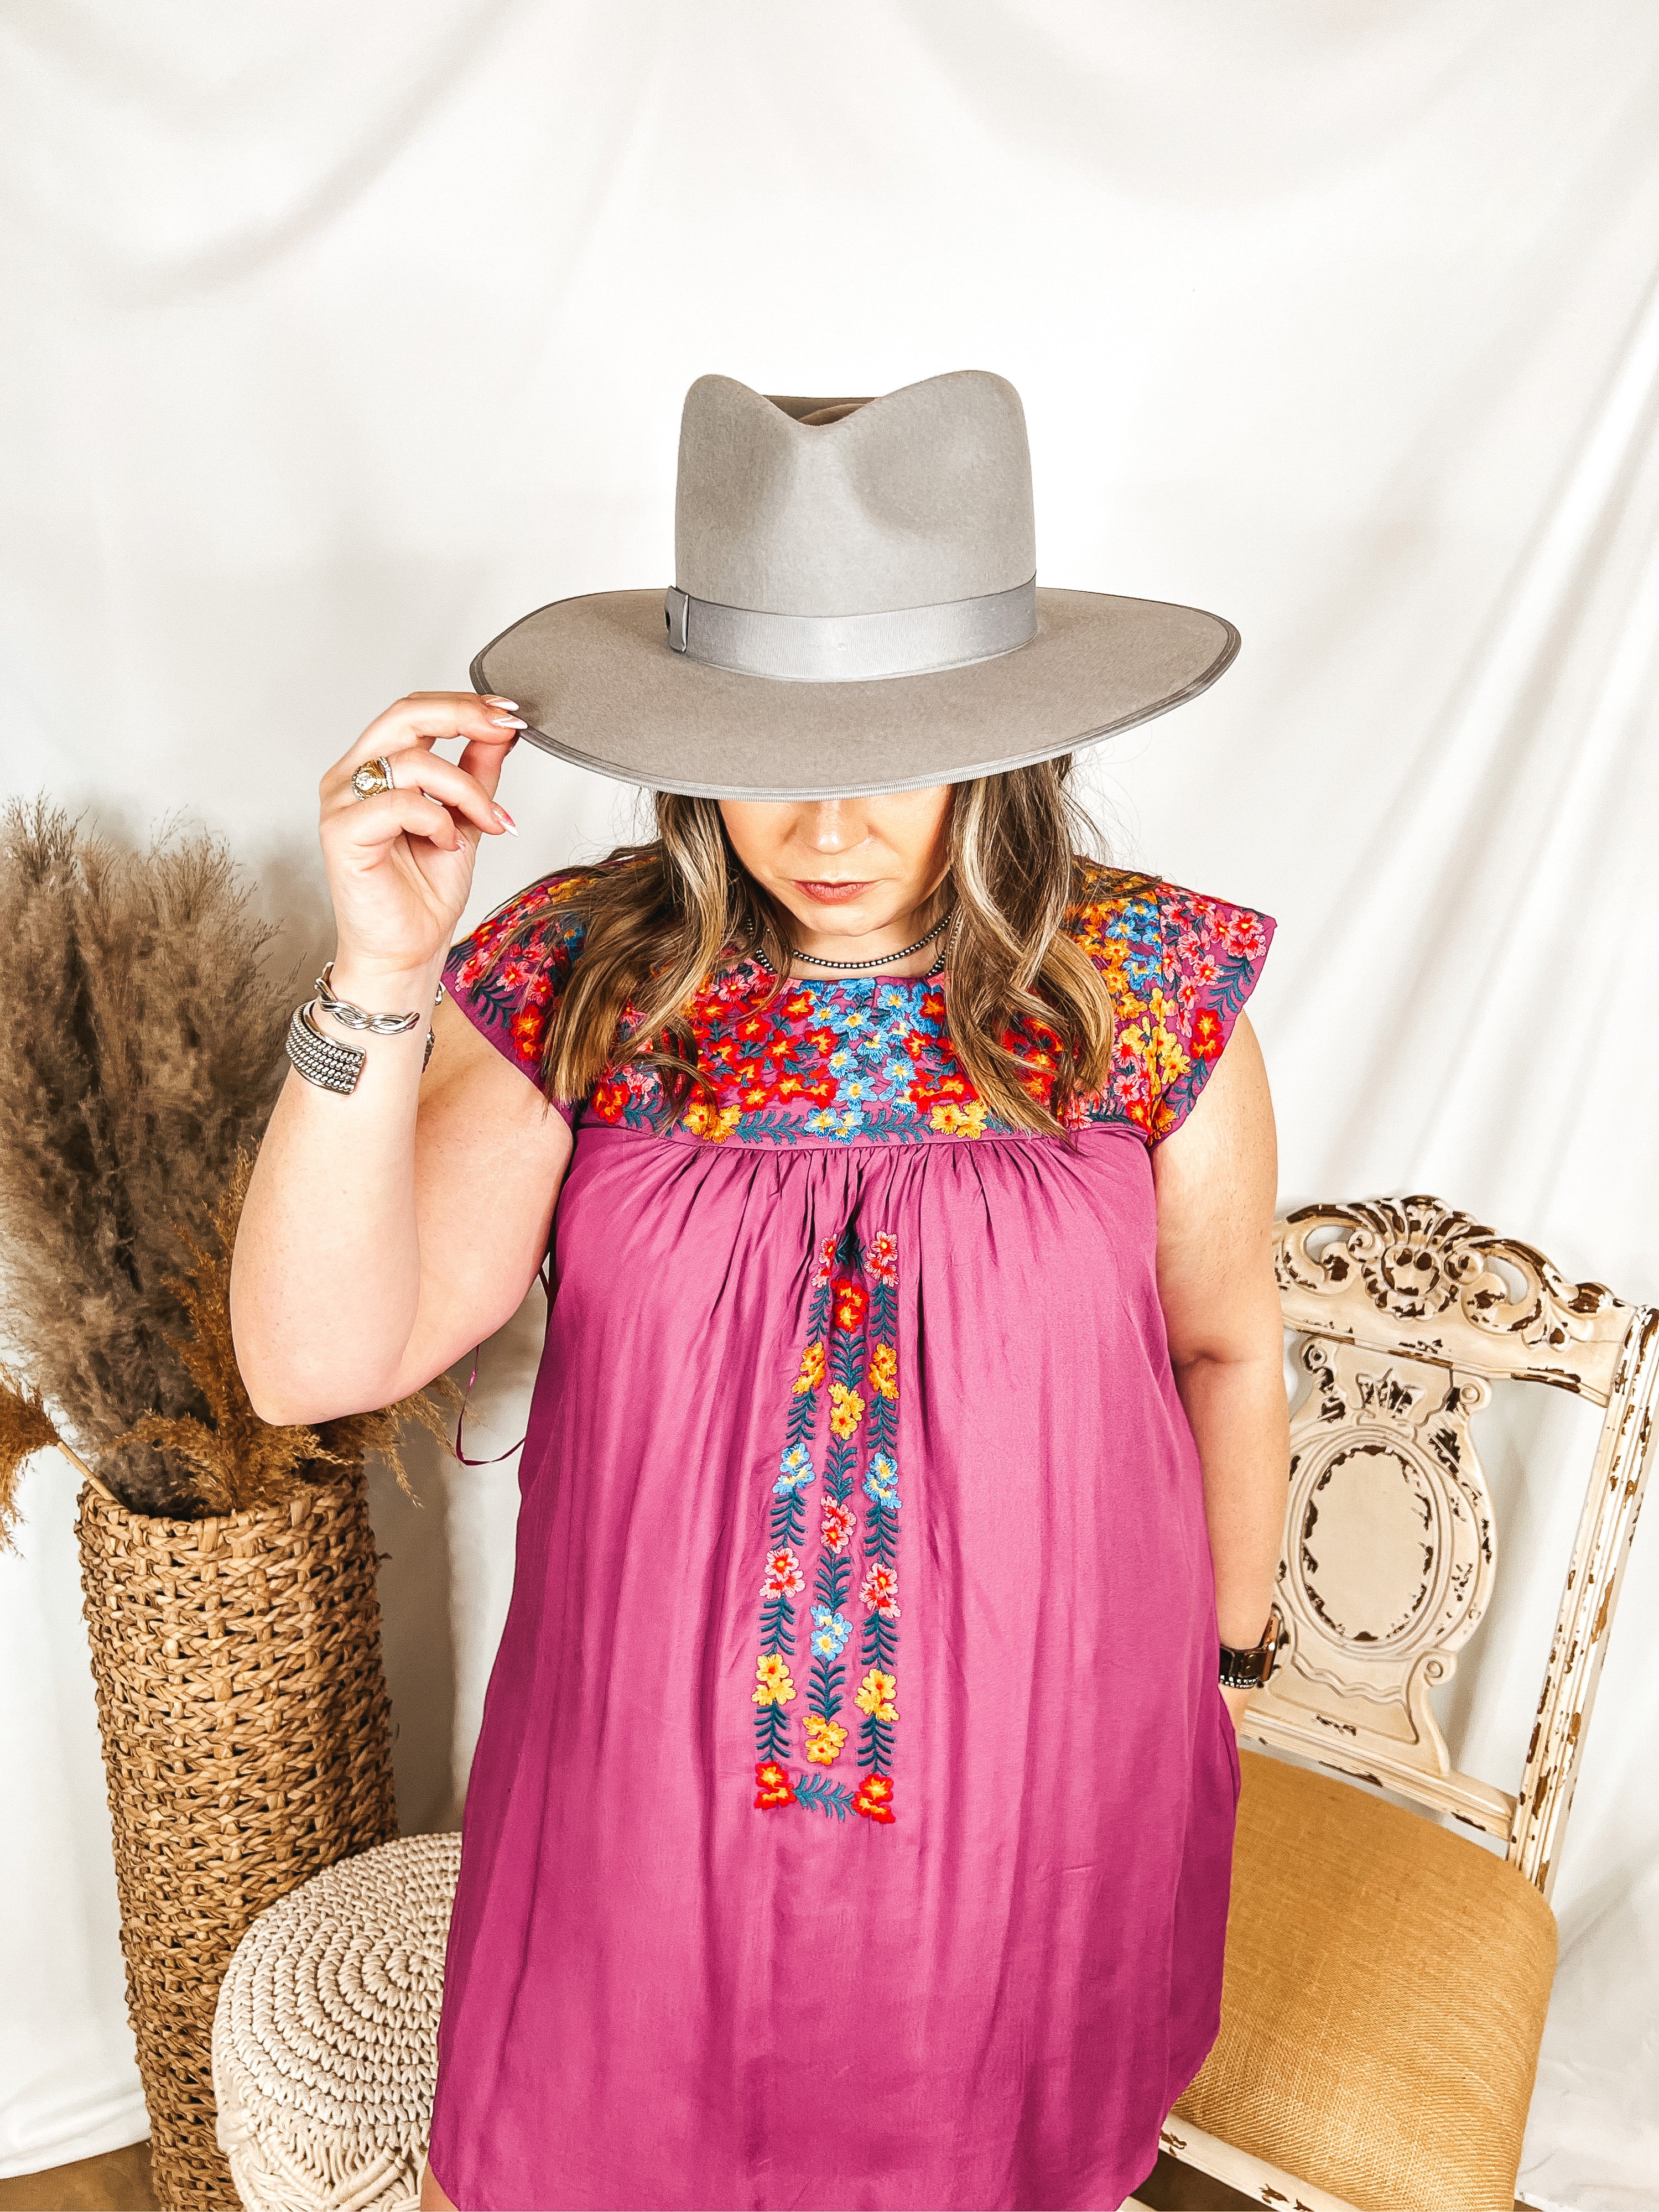 Lack of Color | Stone Rancher Wool Felt Hat in Grey - Giddy Up Glamour Boutique